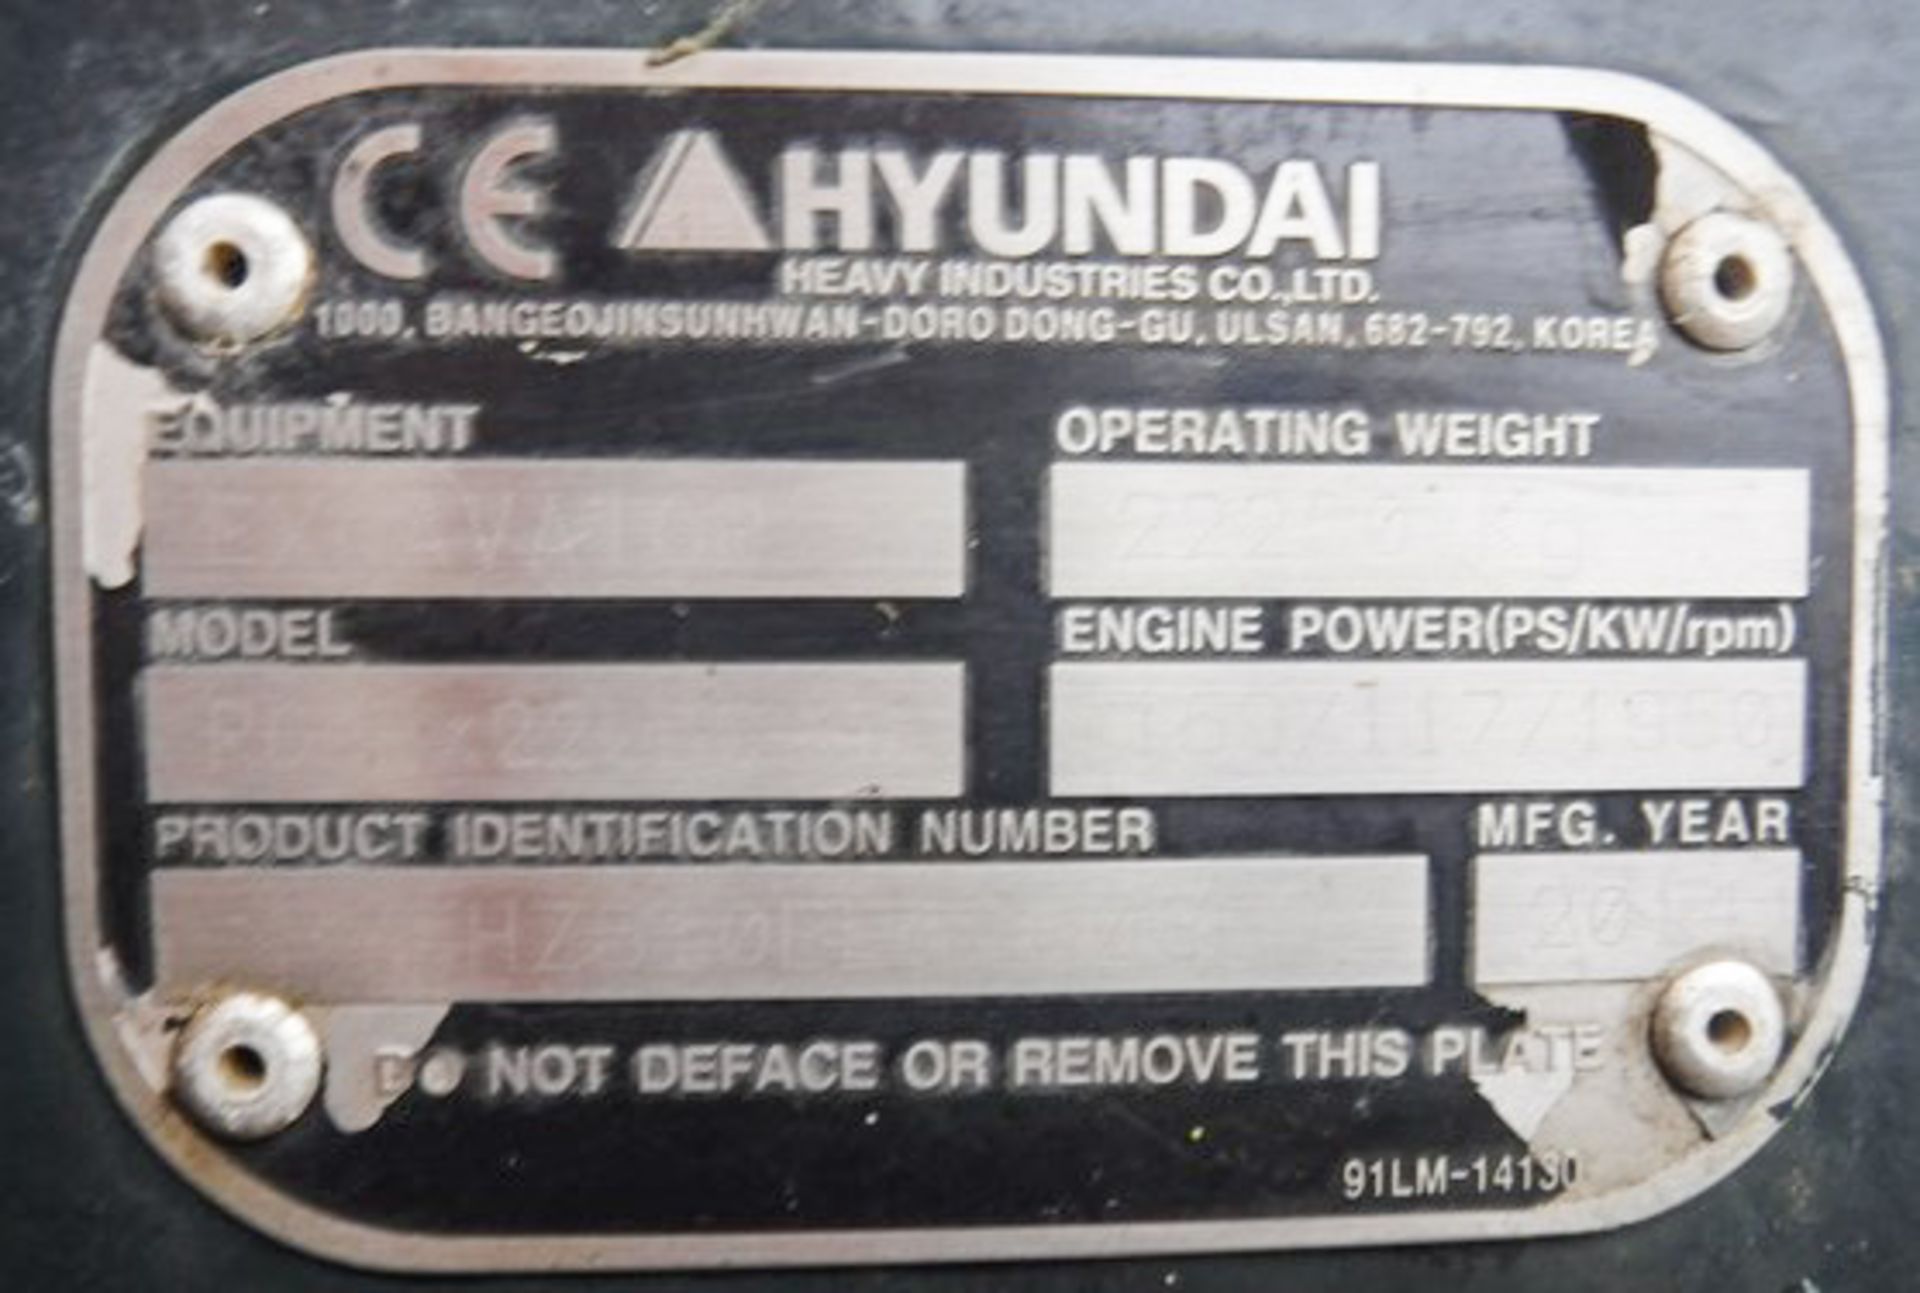 2014 HYUNDAI RC220 LC9A, S/N 359, 2340HRS (NOT VERIFIED), 1 BUCKET, MAX REACH 10M, HYD LINES FOR PIP - Image 8 of 17